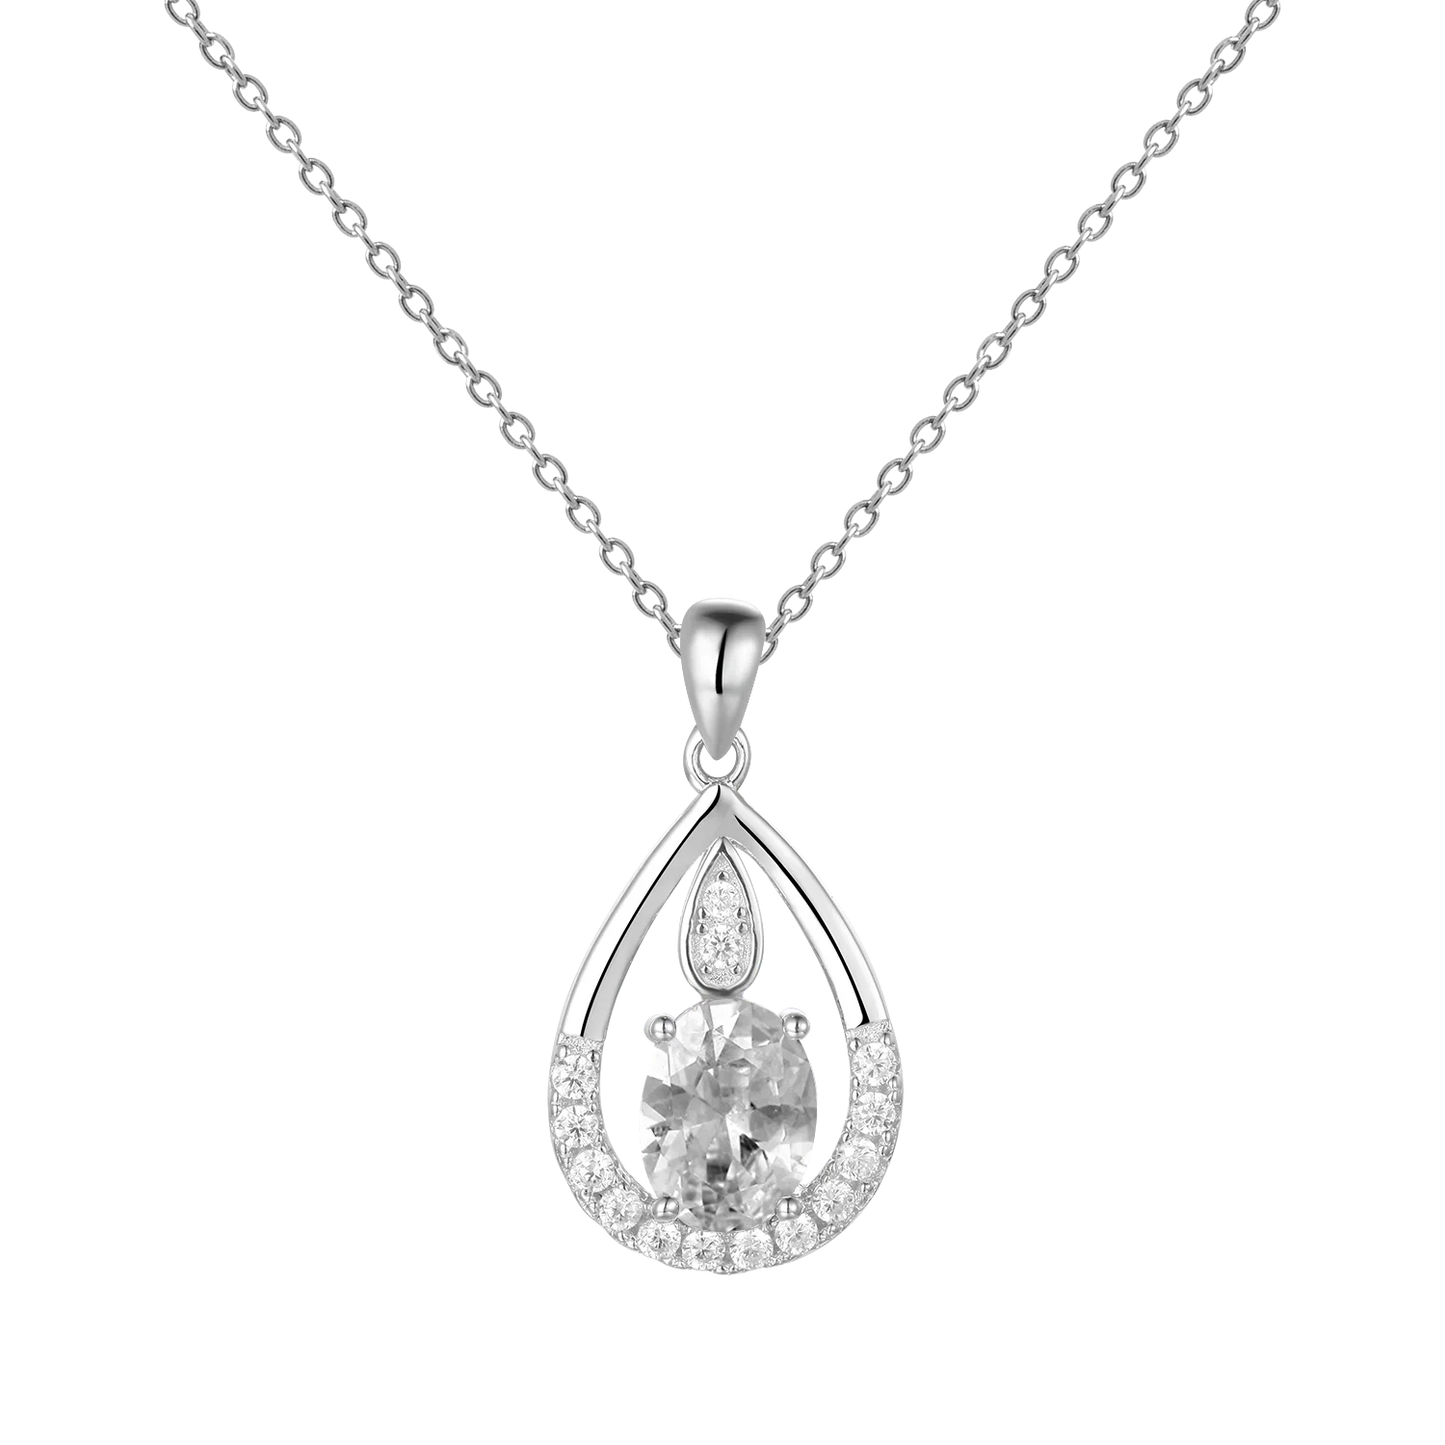 Gem's Ballet December Birthstone Topaz Necklace 6x8mm Oval Pink Topaz Pendant Necklace in 925 Sterling Silver with 18" Chain White CZ